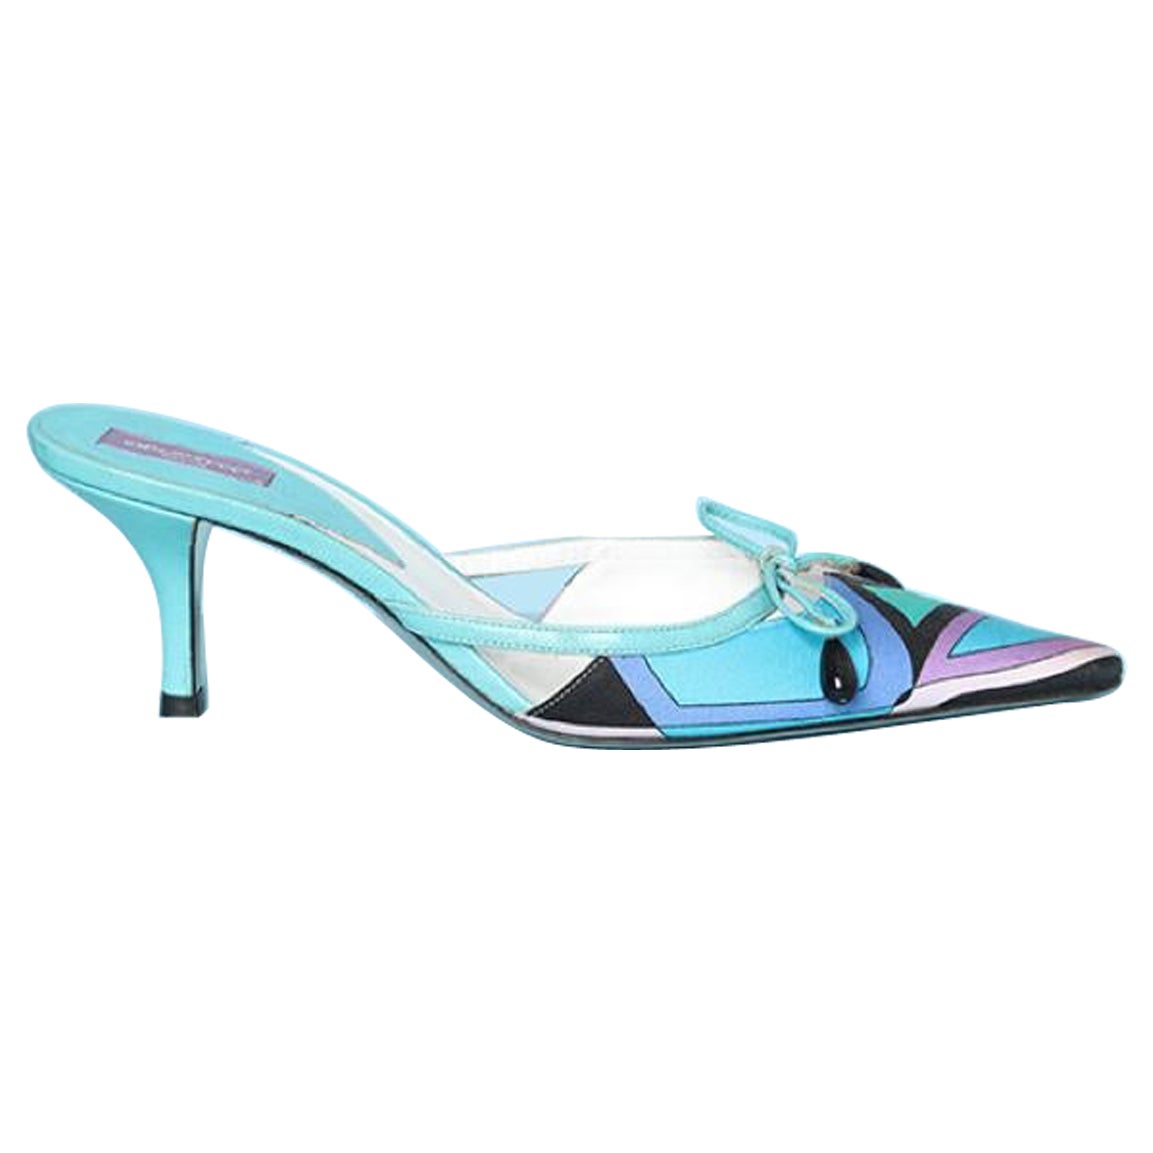 Printed fabric and blue leather mule shoes  with bow and beads Emilio Pucci  For Sale